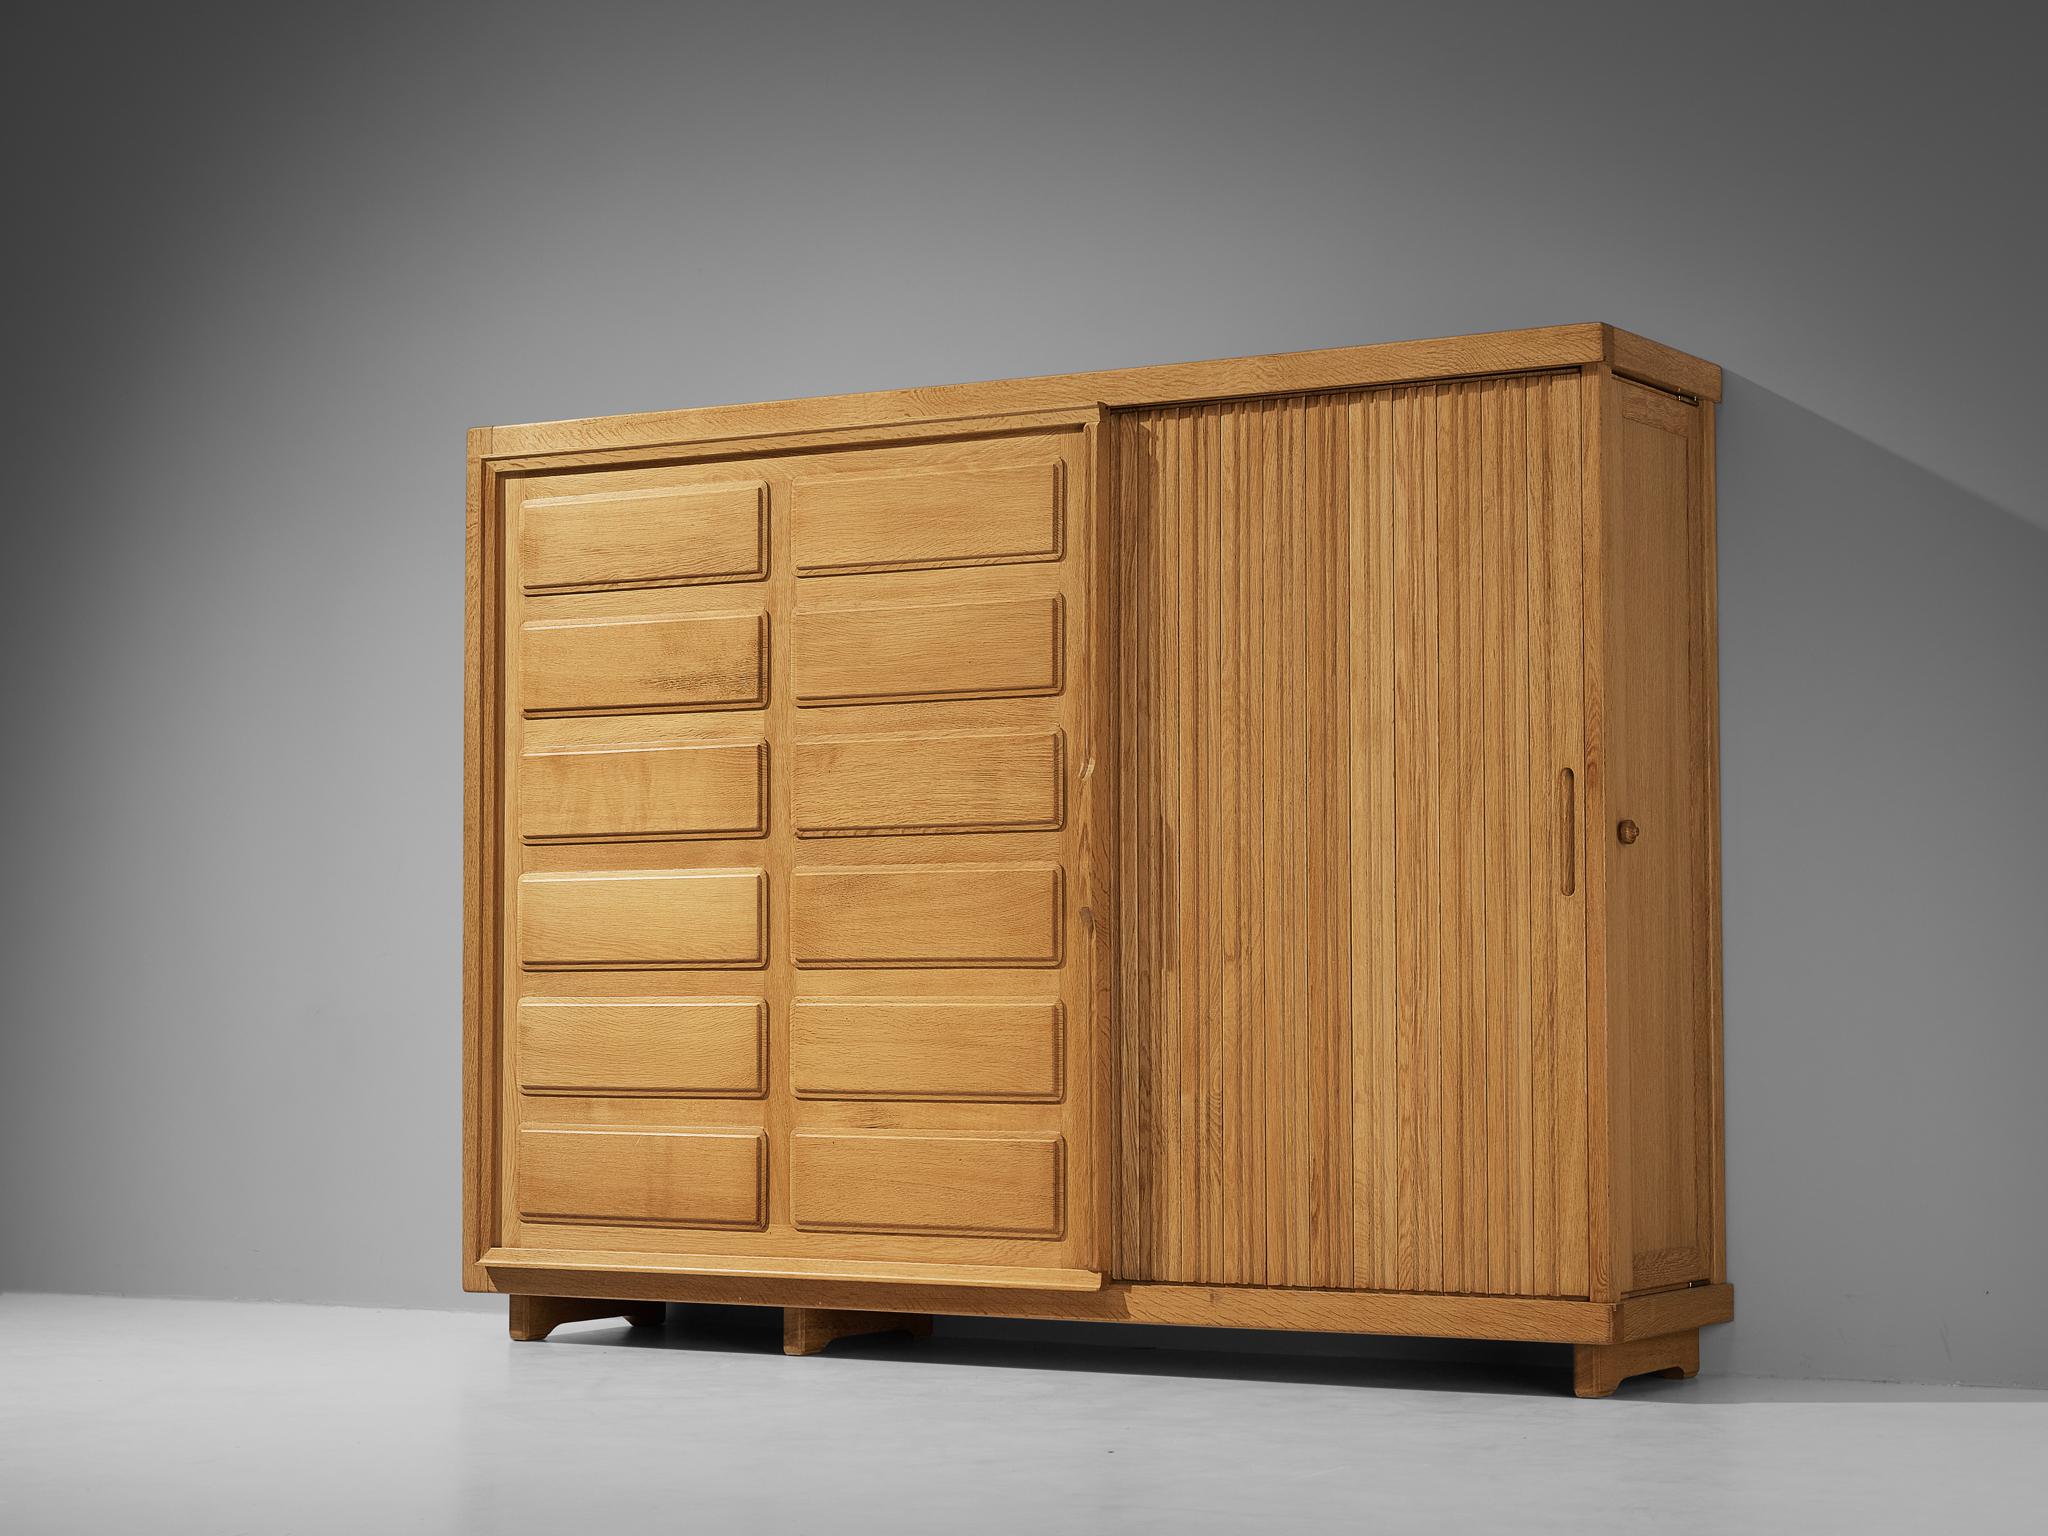 Guillerme et Chambron for Votre Maison, armoire or large cabinet, oak, France, 1960s

This grandiose highboard or wardrobe is a good example of excellent woodworking by virtue of the graphical designed door panels illustrating elongated, vertical